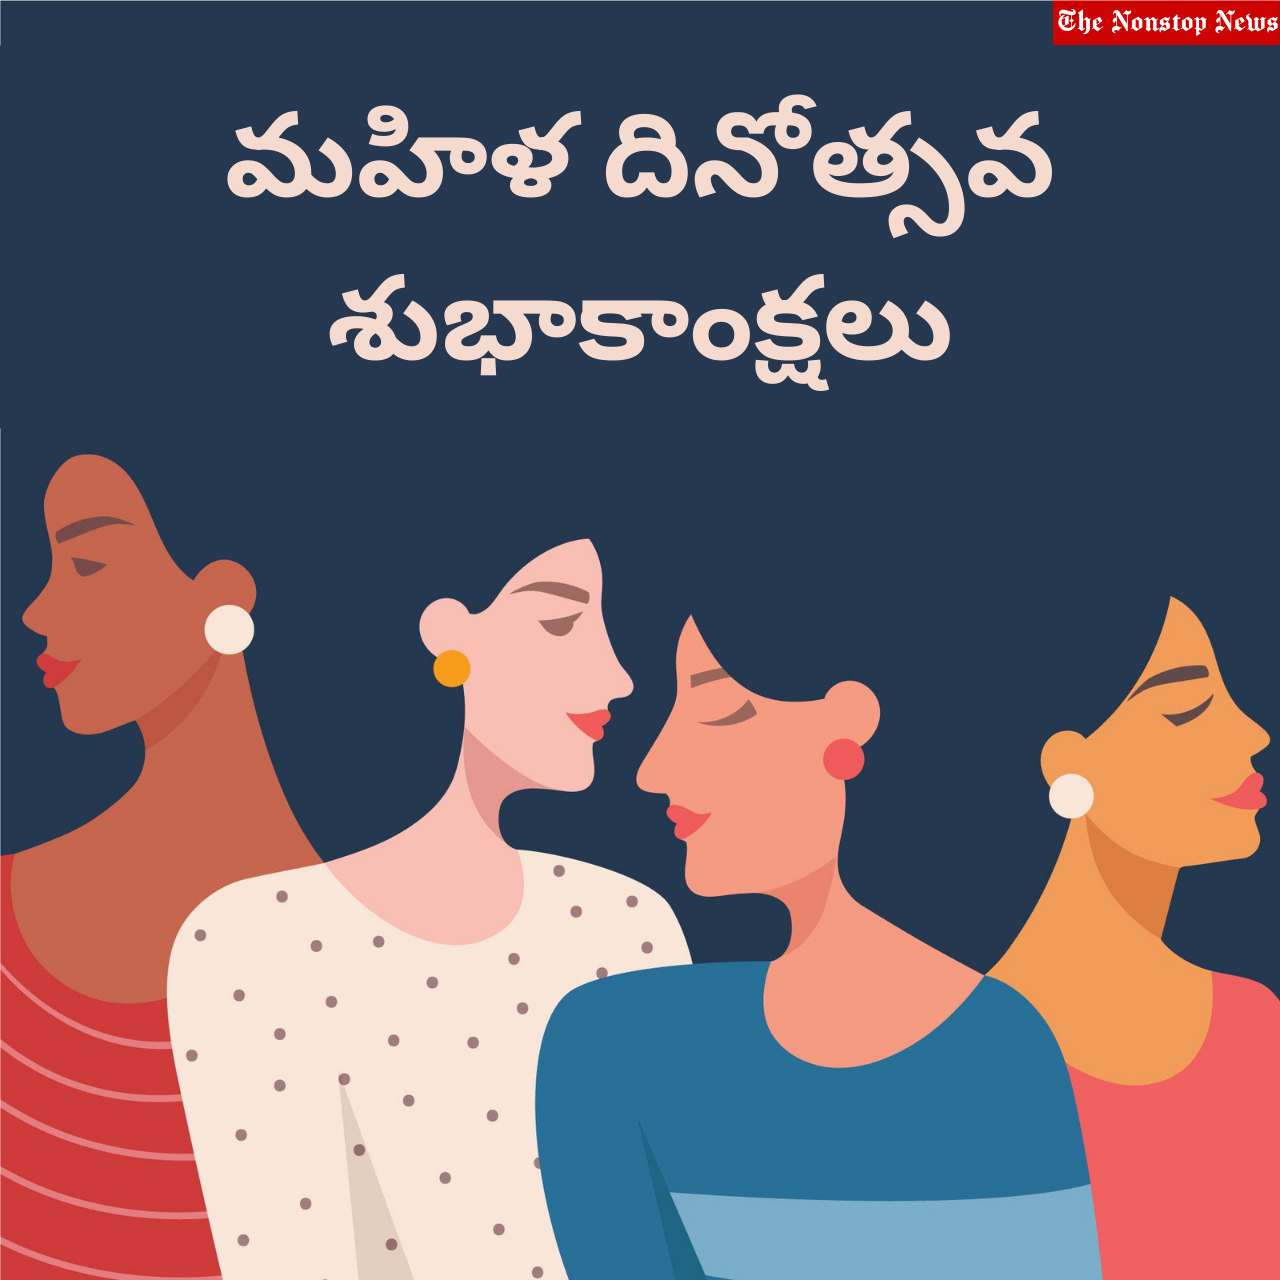 Happy Women's Day 2022 Telugu Quotes, Wishes, HD Images, Messages, Greetings to Share